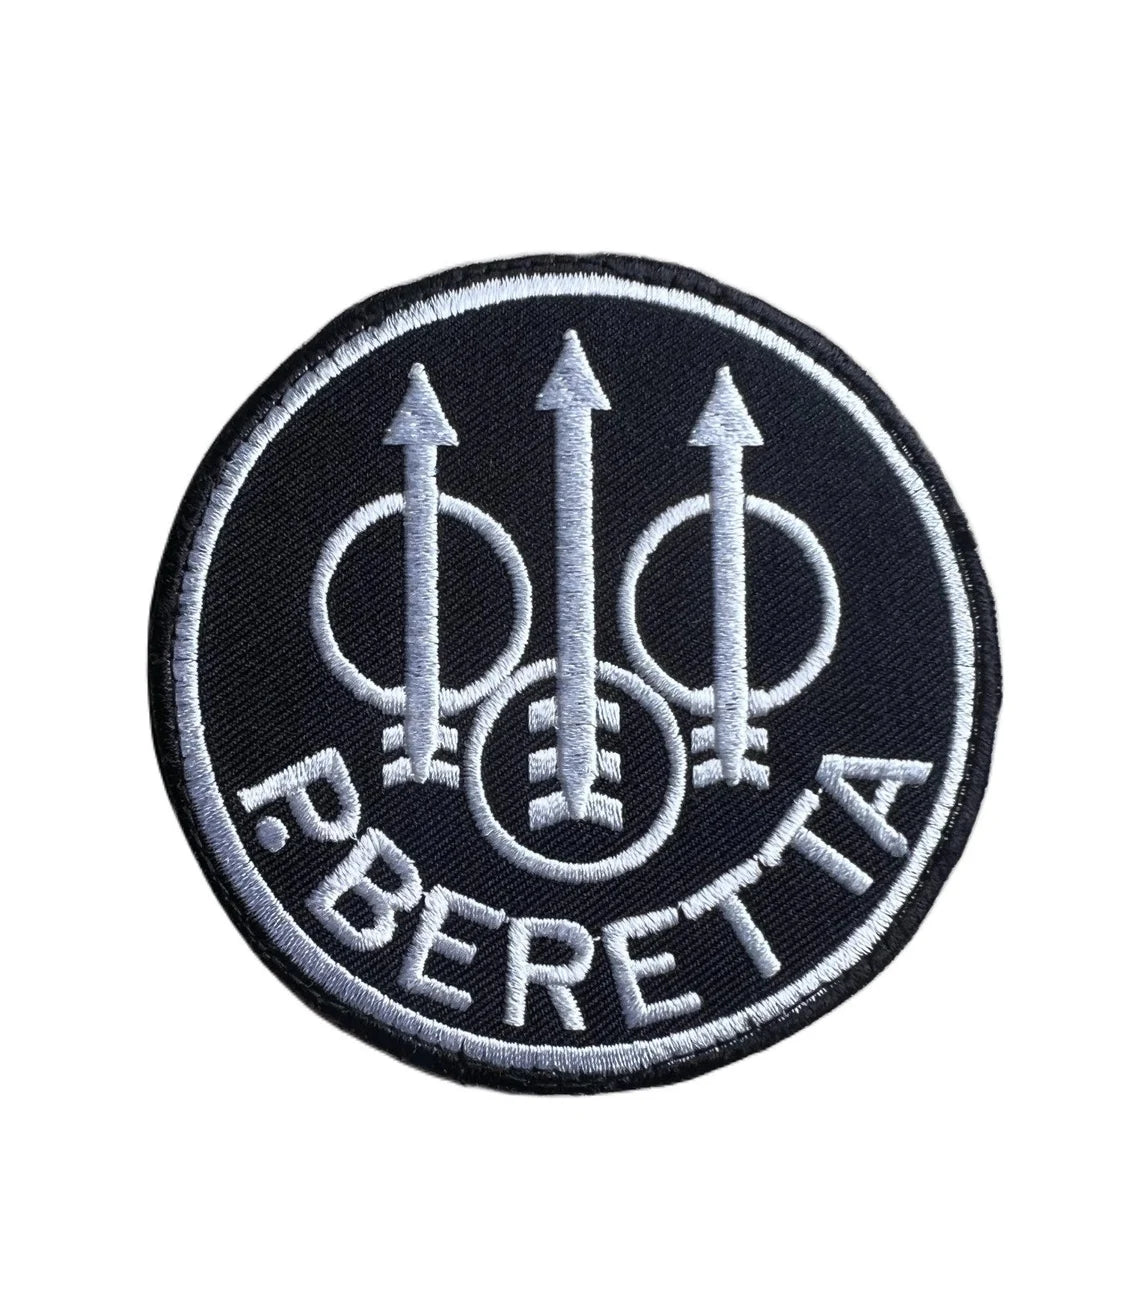 Beretta Logo Patch (3.2 Inch) Hook and Loop Velcro Badge Tactical Vest, Gamer, Airsoft, Paintball, Backpack, Jacket, Hat, Tactical Gift Patches